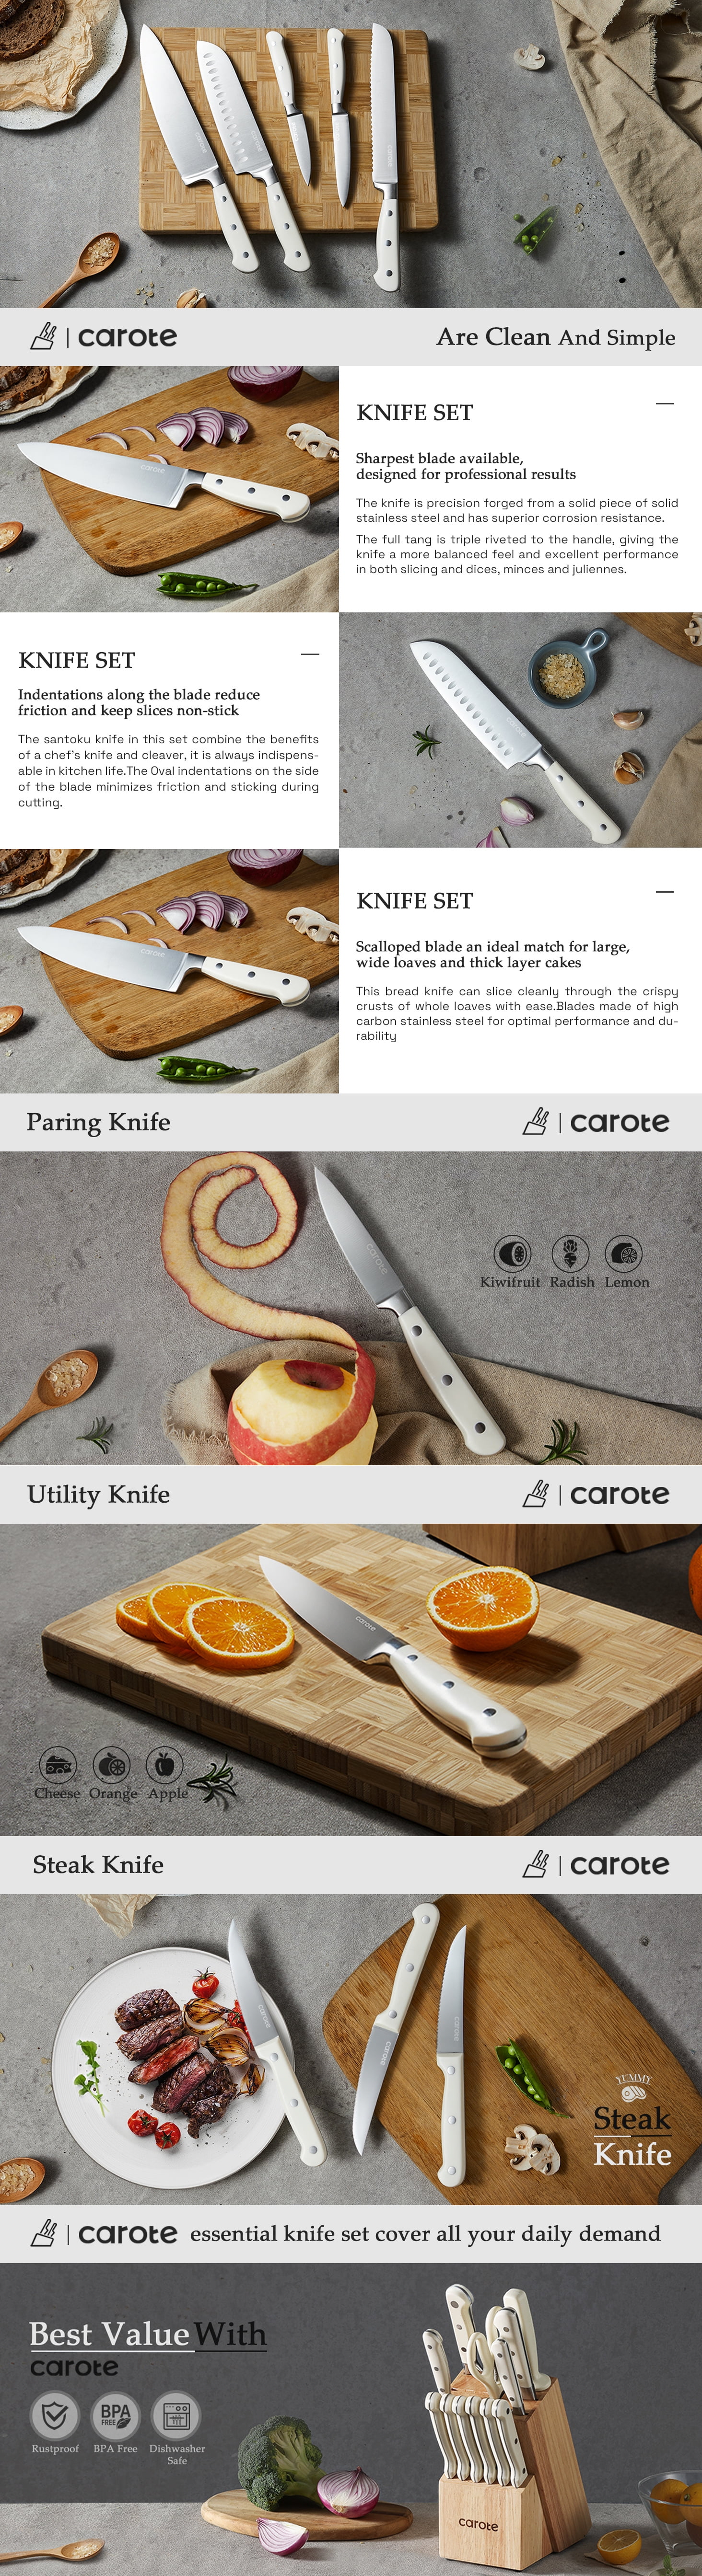 Carote Knife Set  NOW ONLY $39.99 (was $200)!